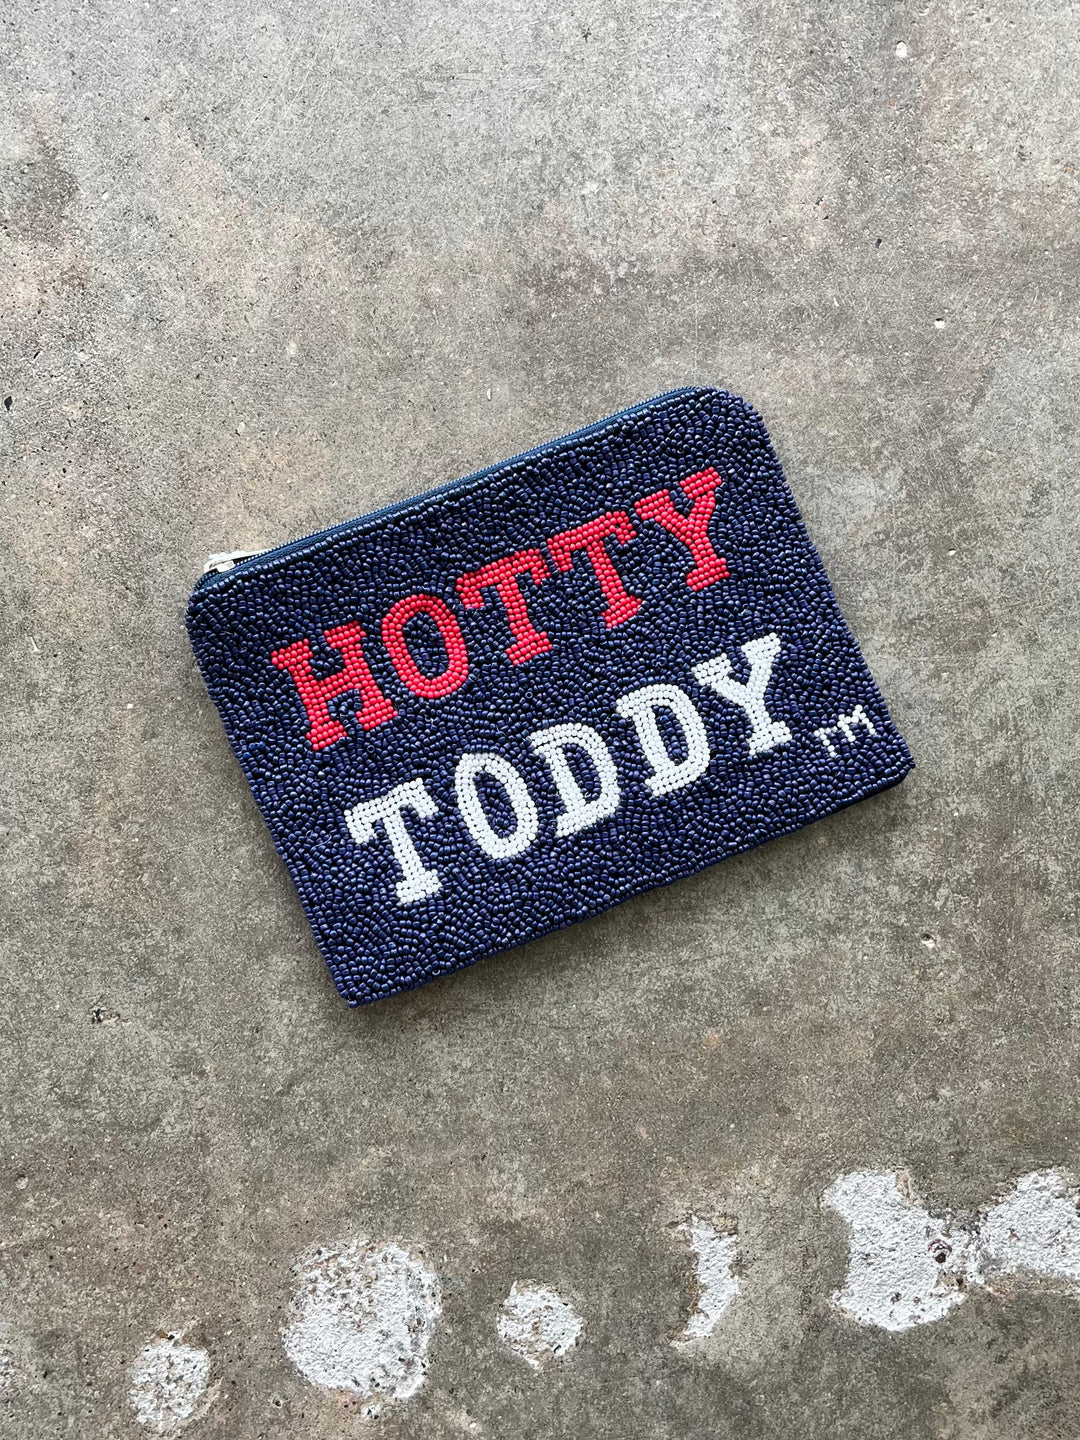 Hotty Totty Pouch, Purses, Adeline, Adeline, dallas boutique, dallas texas, texas boutique, women's boutique dallas, adeline boutique, dallas boutique, trendy boutique, affordable boutique